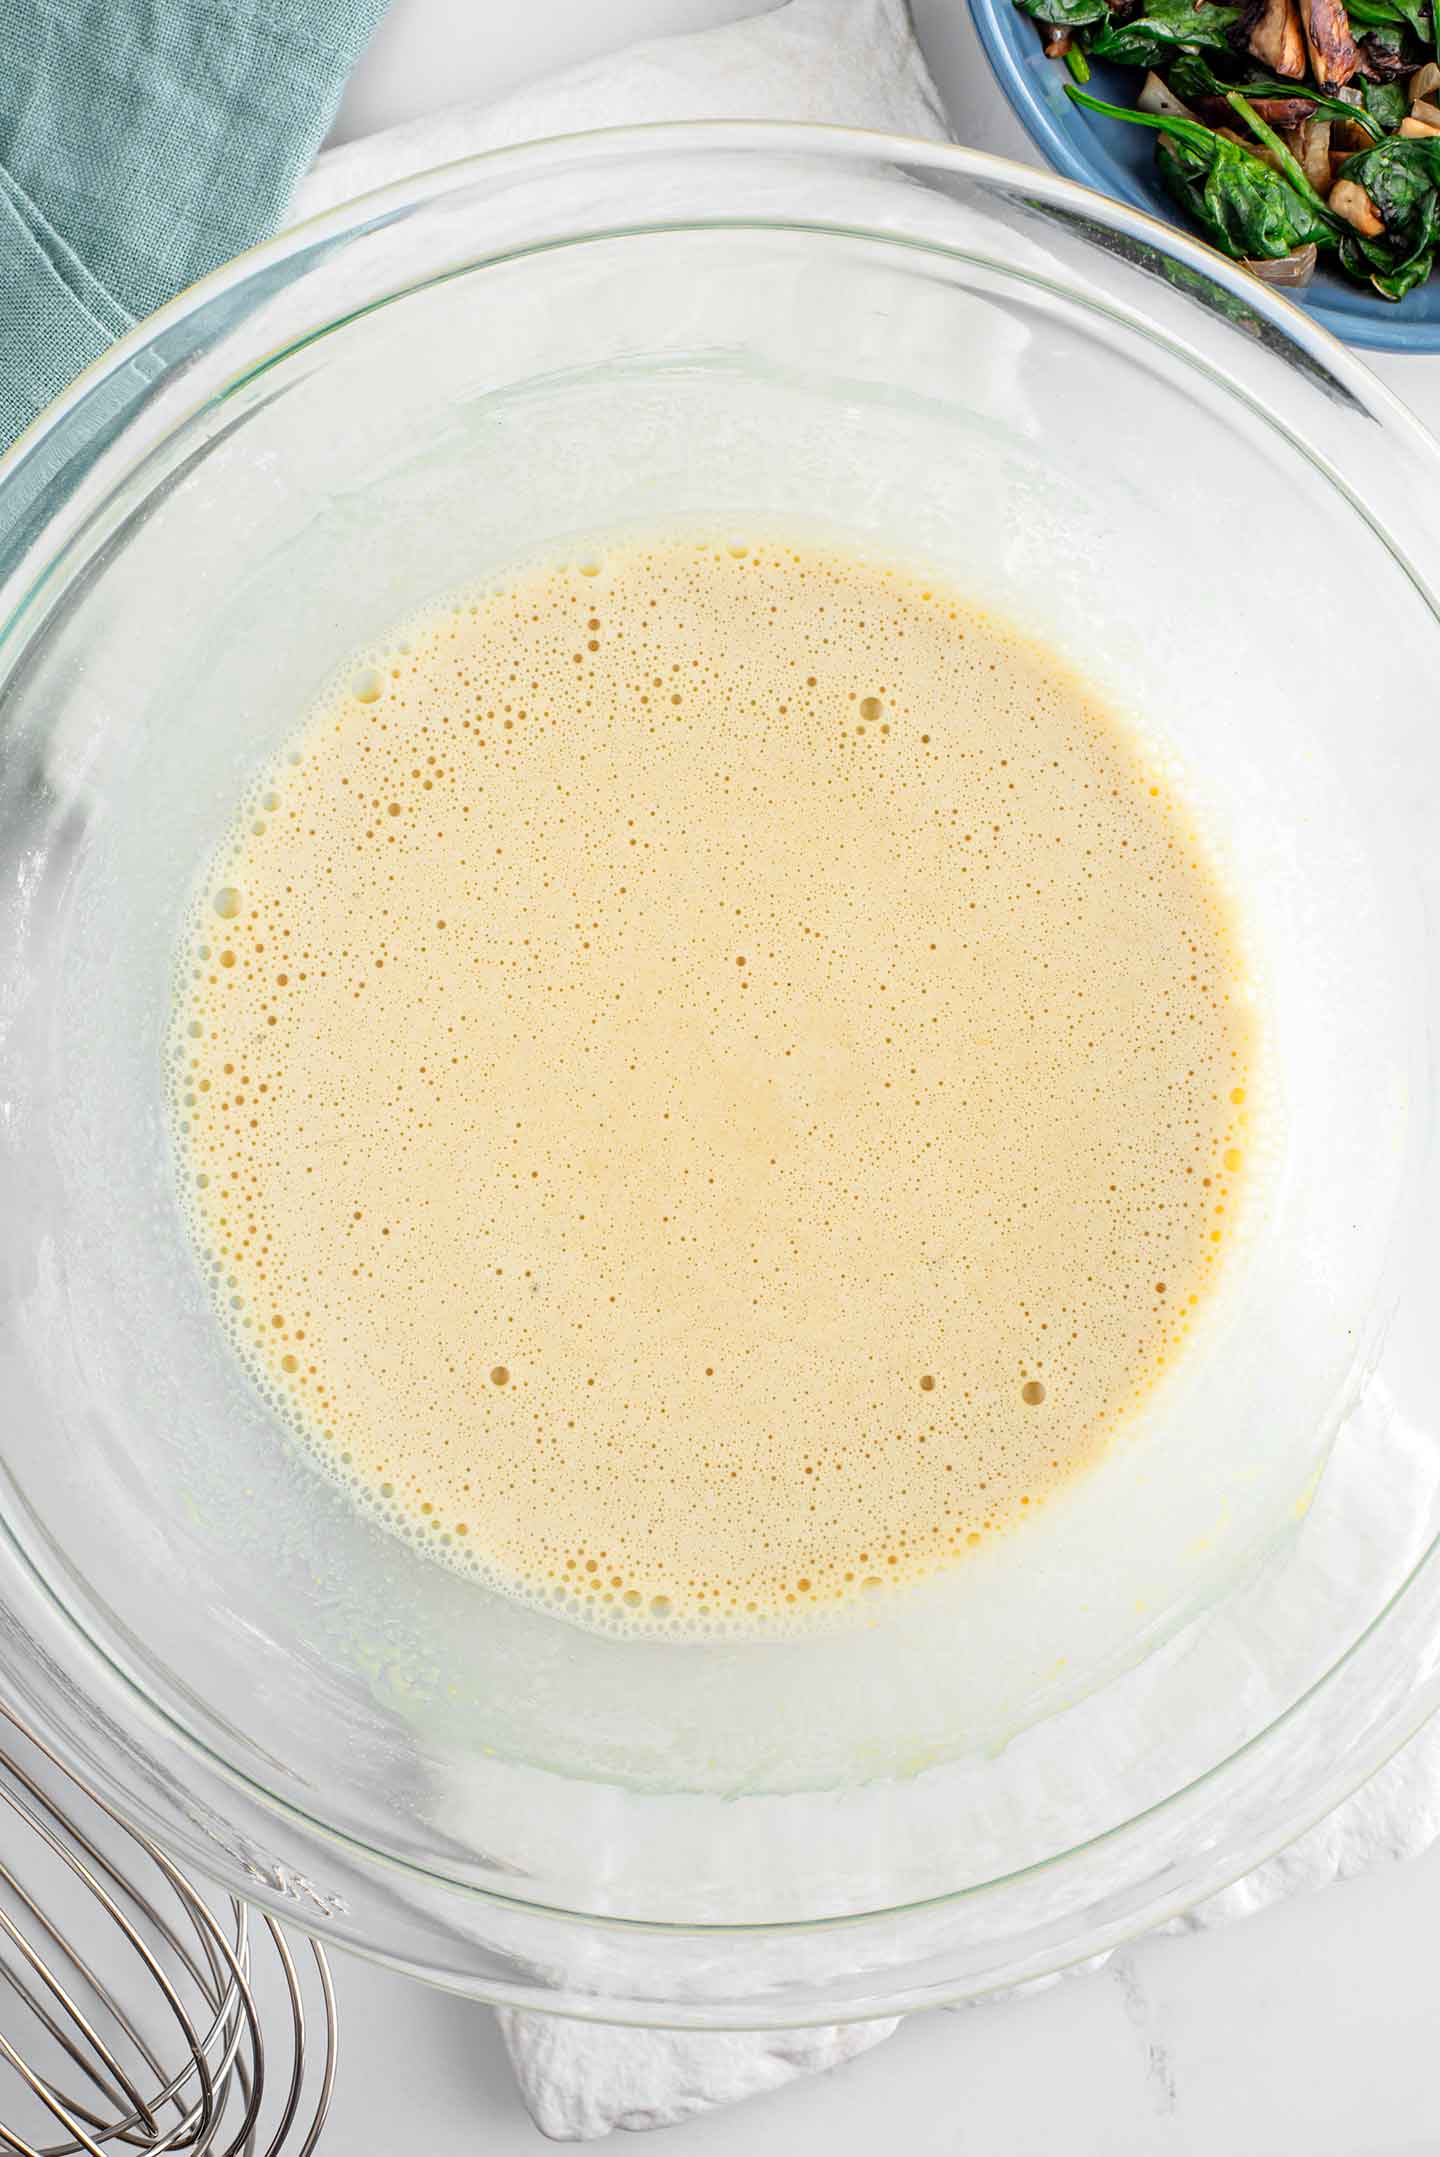 Top down view of a vegan omelette batter in a glass bowl. The batter has a thick but pourable consistency and is lump free. 